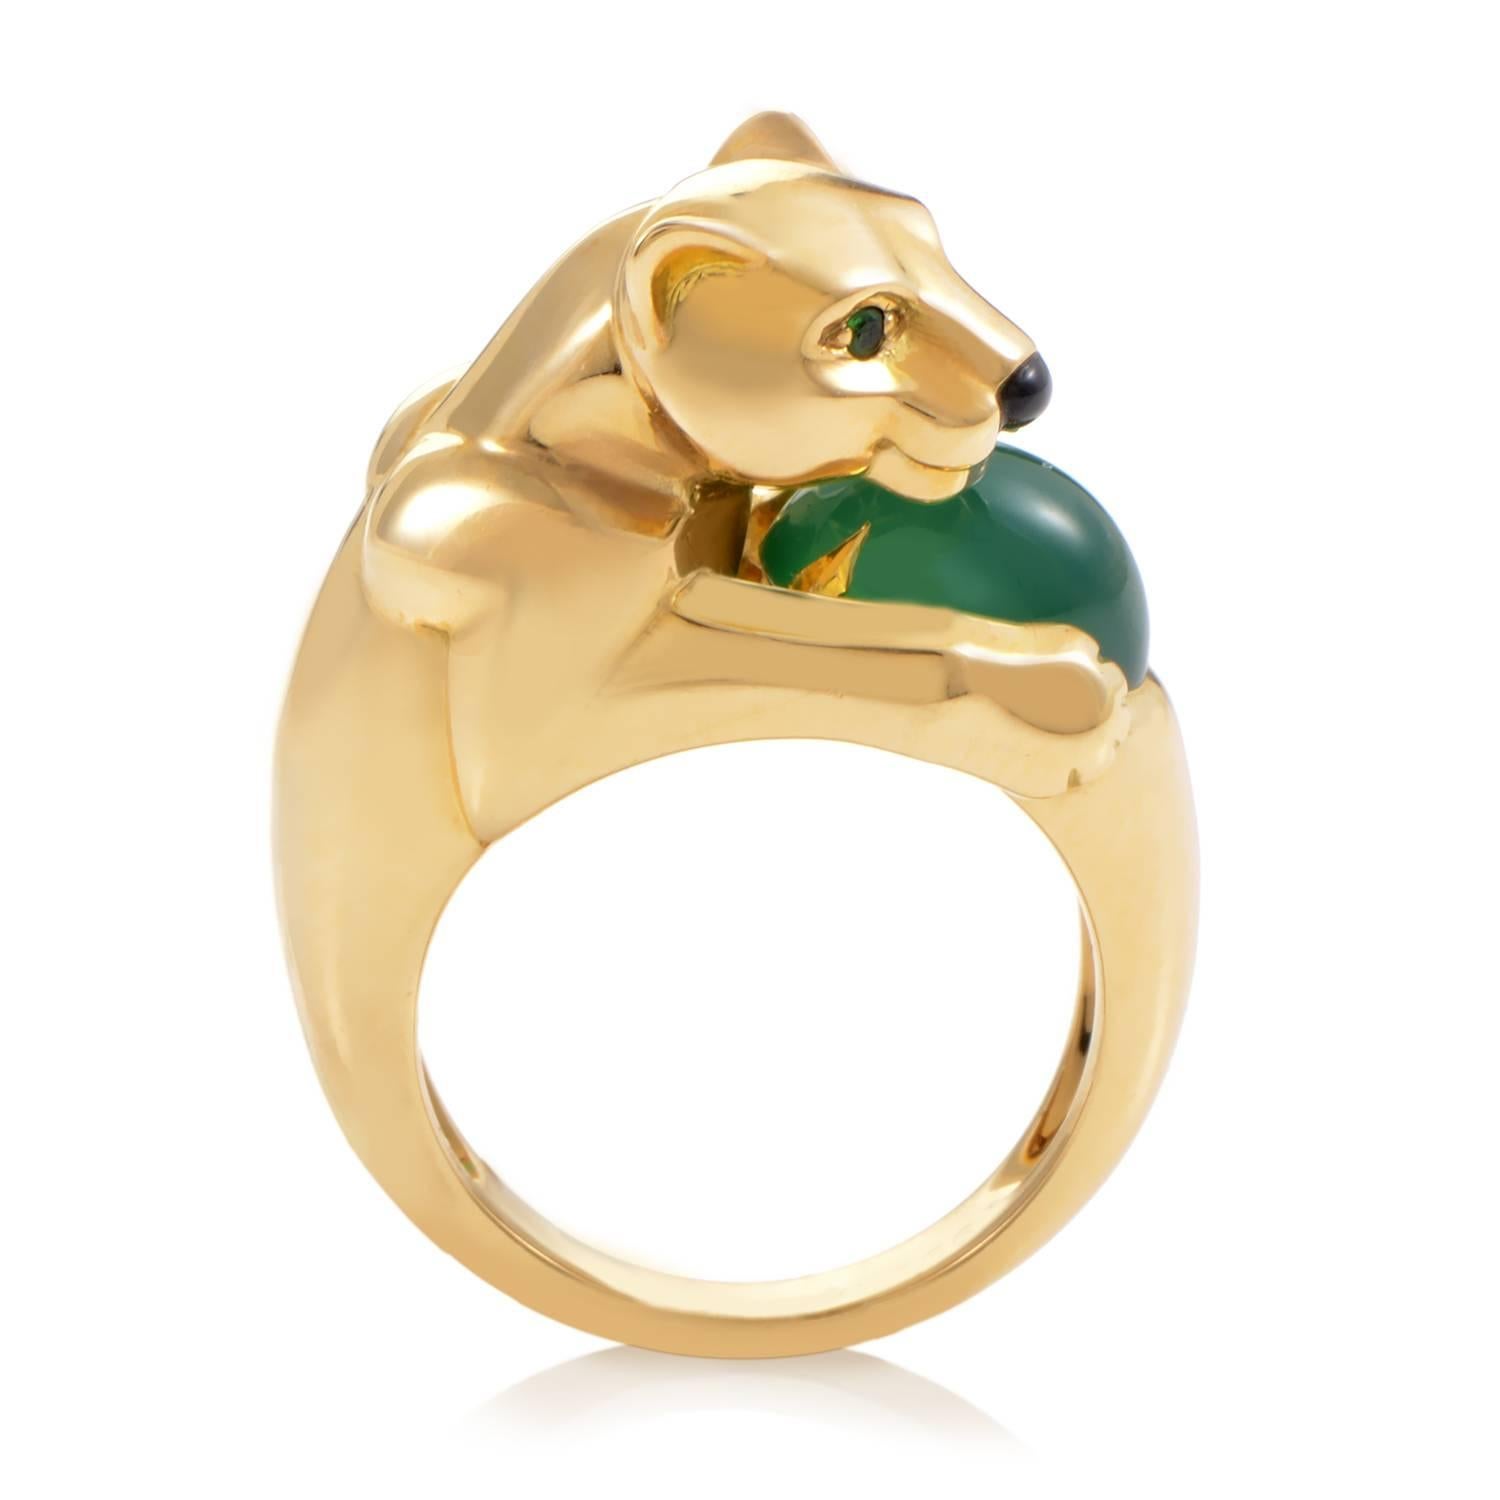 A pristine turn of 18K Yellow gold is the masterful starting point of this Cartier ring. The gold broadens in its ascent, eventually rolling into the majestic bust of a panther at its crown. Onyx gives rich substance to the snout, while emeralds add